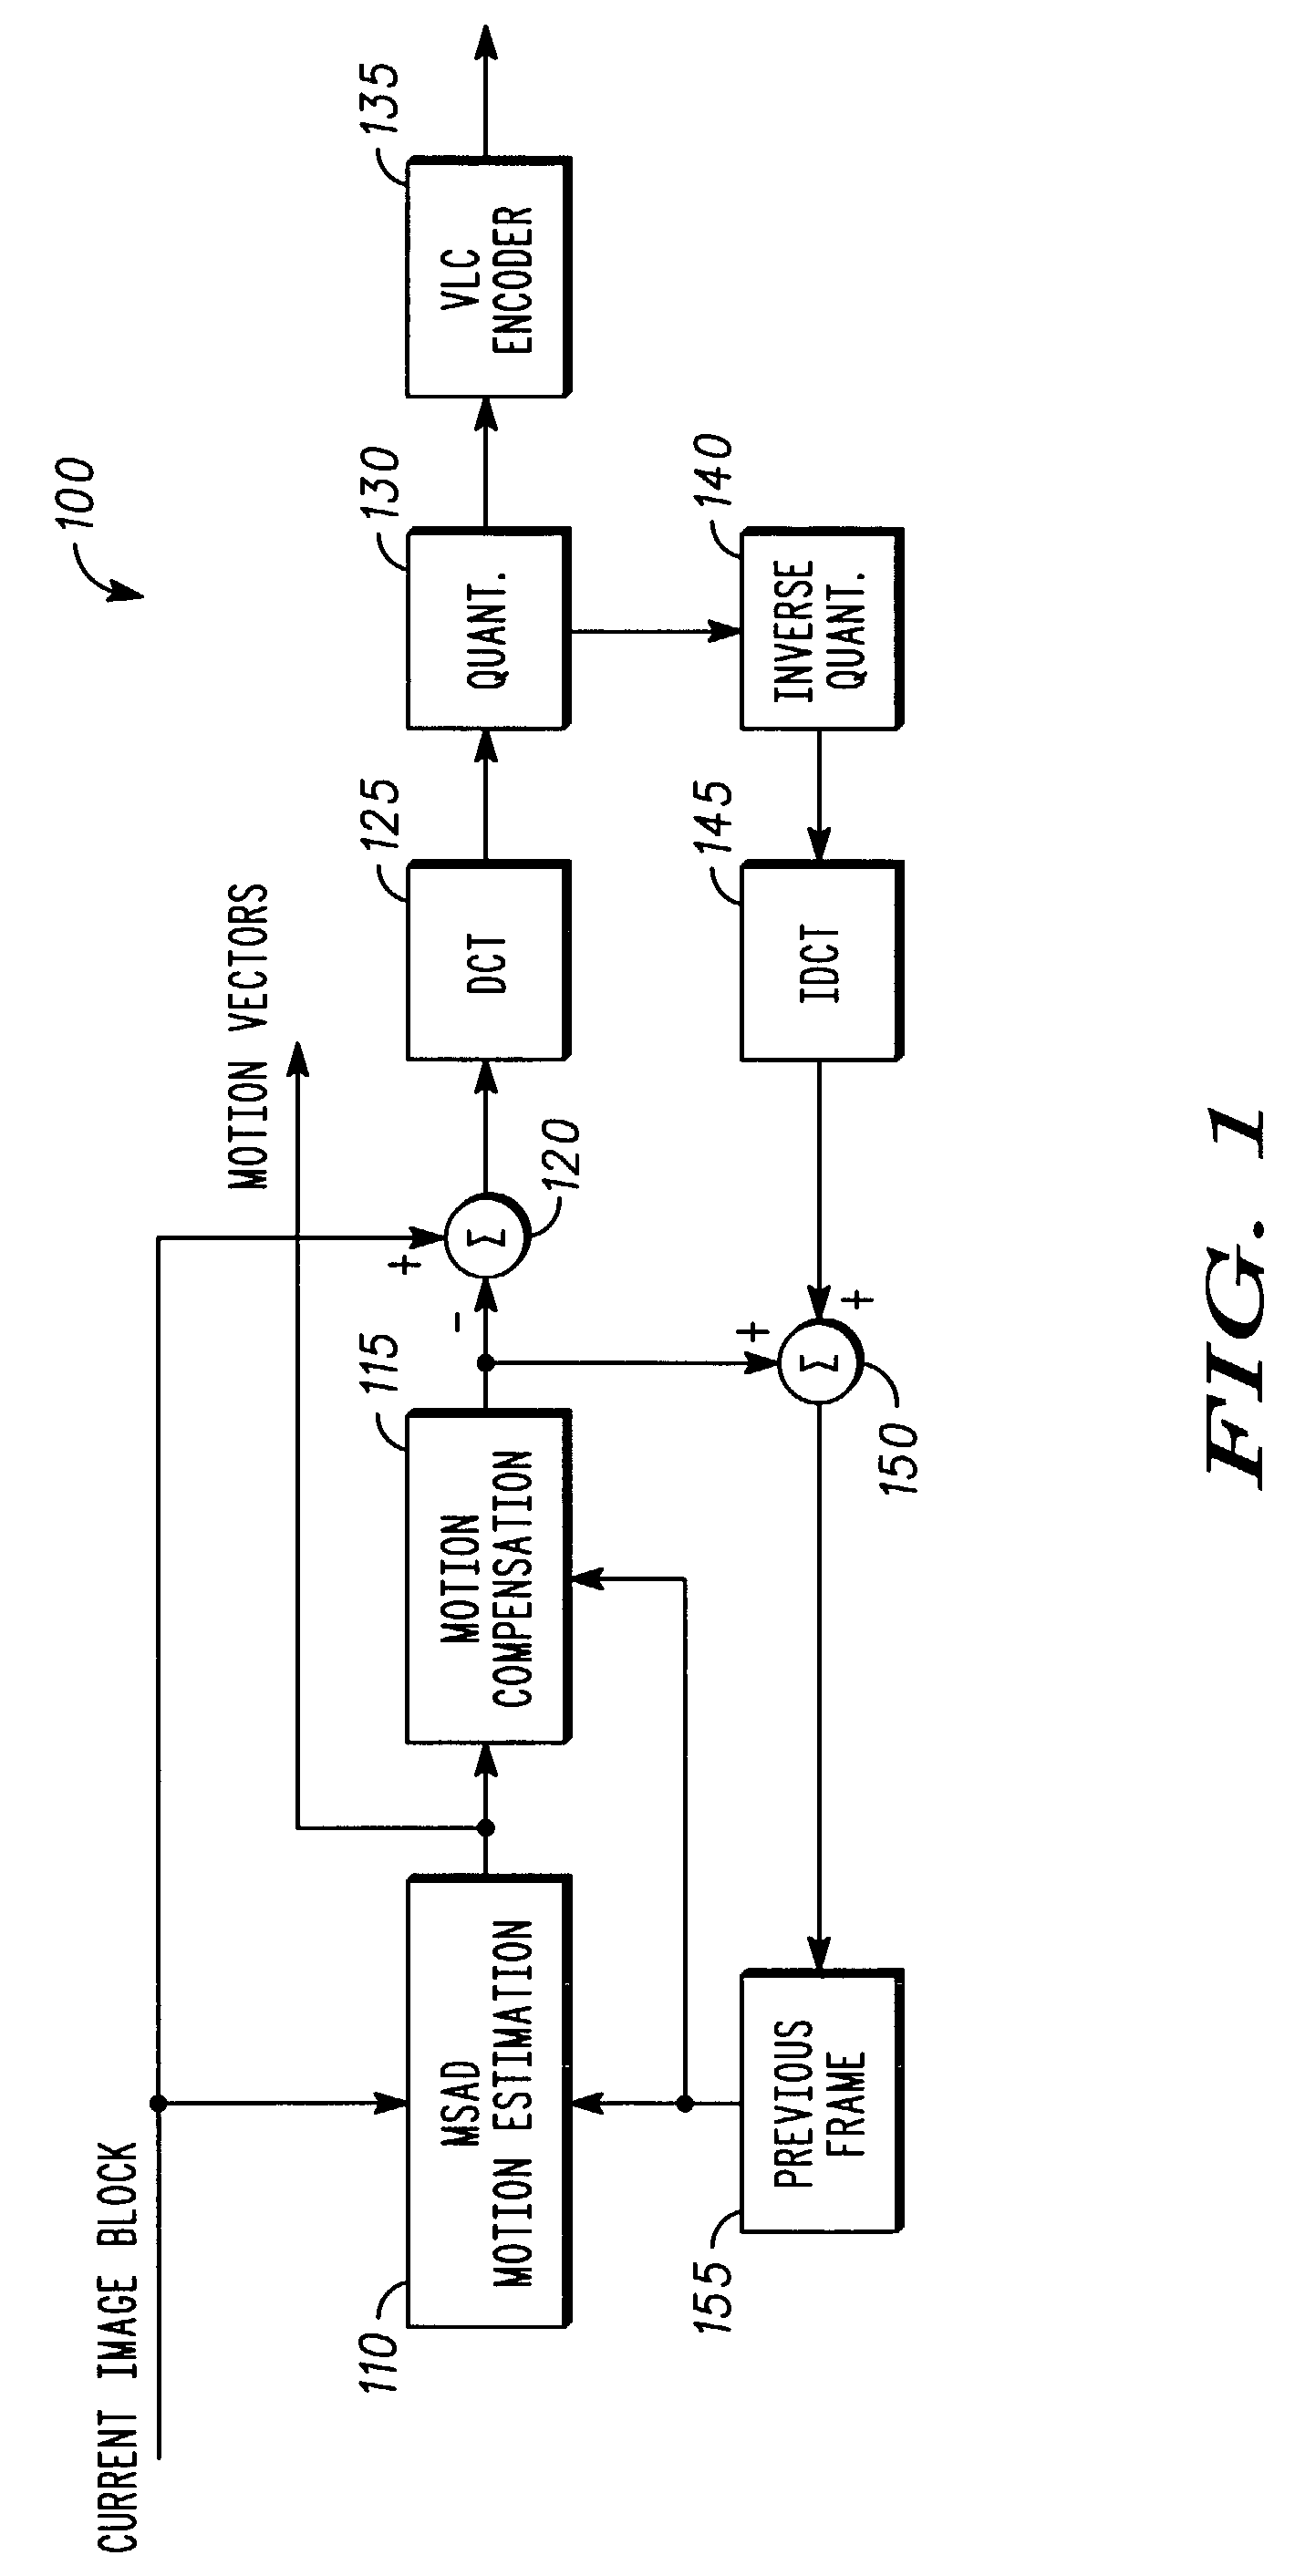 Method and apparatus for determining block match quality